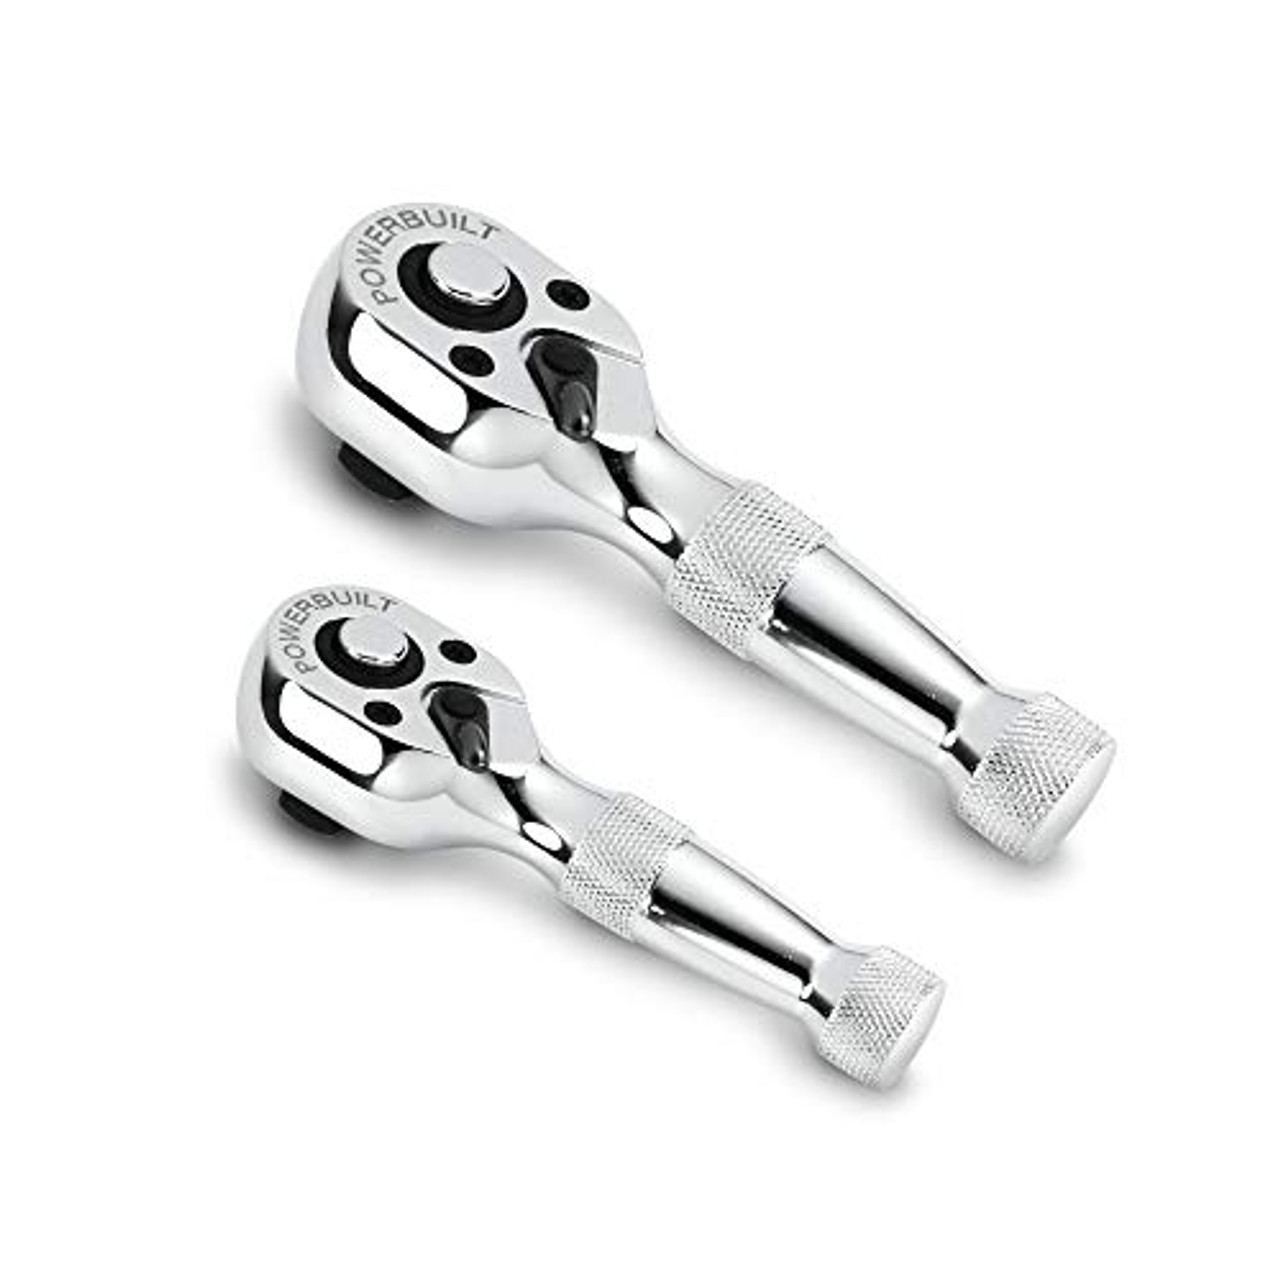 Powerbuilt 640927 1/4-Inch and 3/8-Inch Stubby Ratchet Set, 2-Piece,Silver  JB Tools